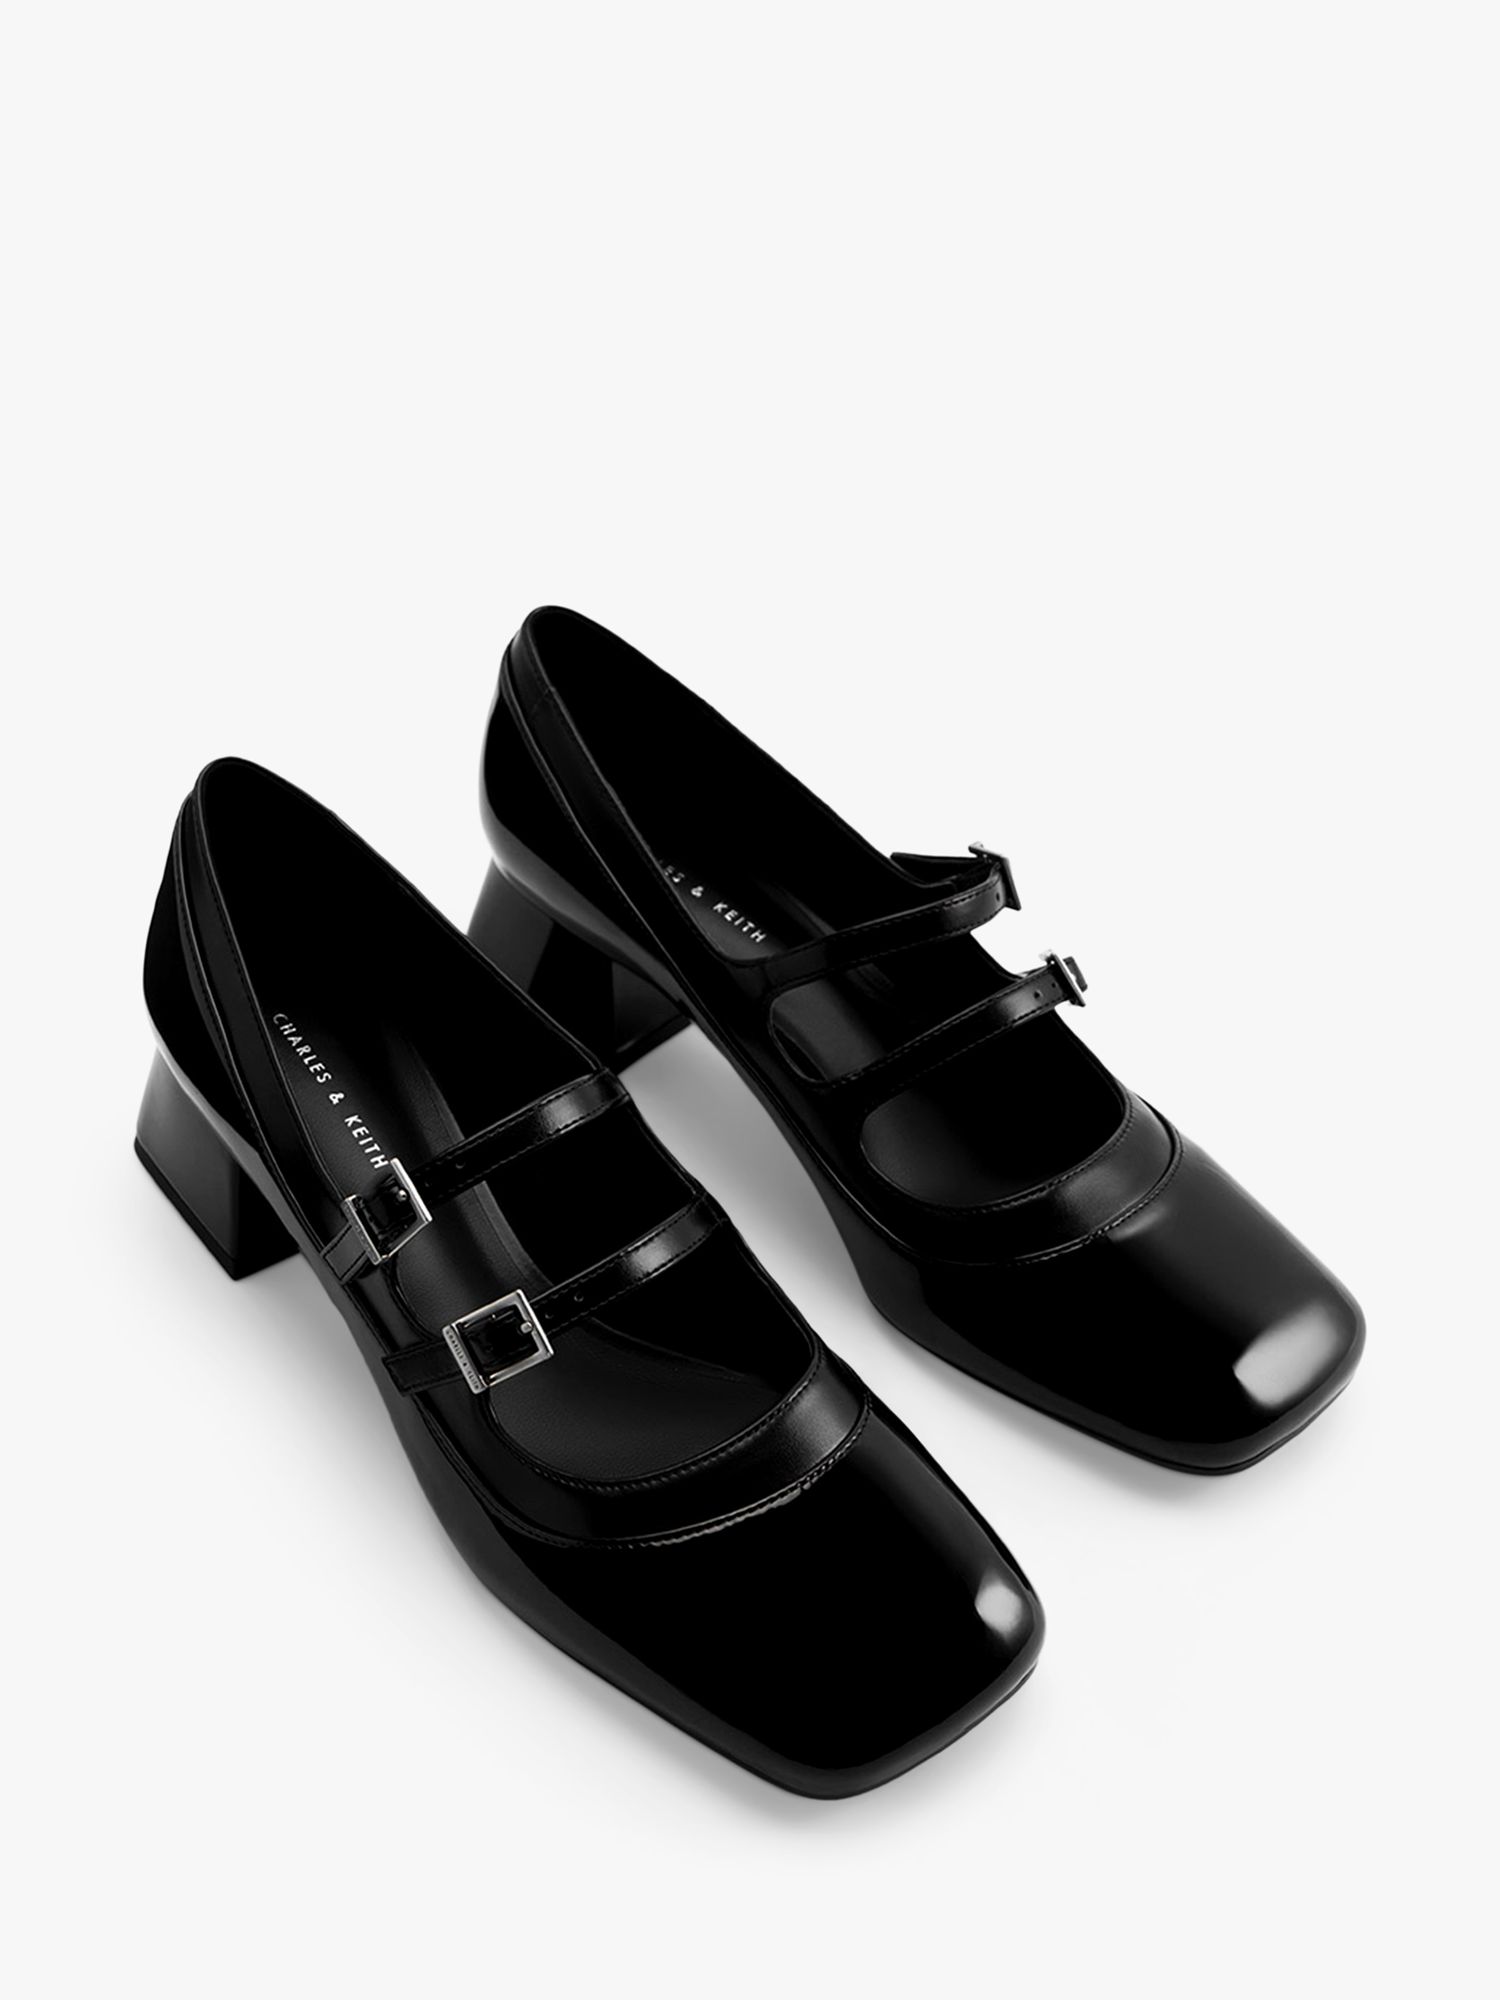 CHARLES & KEITH Patent Mary Jane Shoes, Black